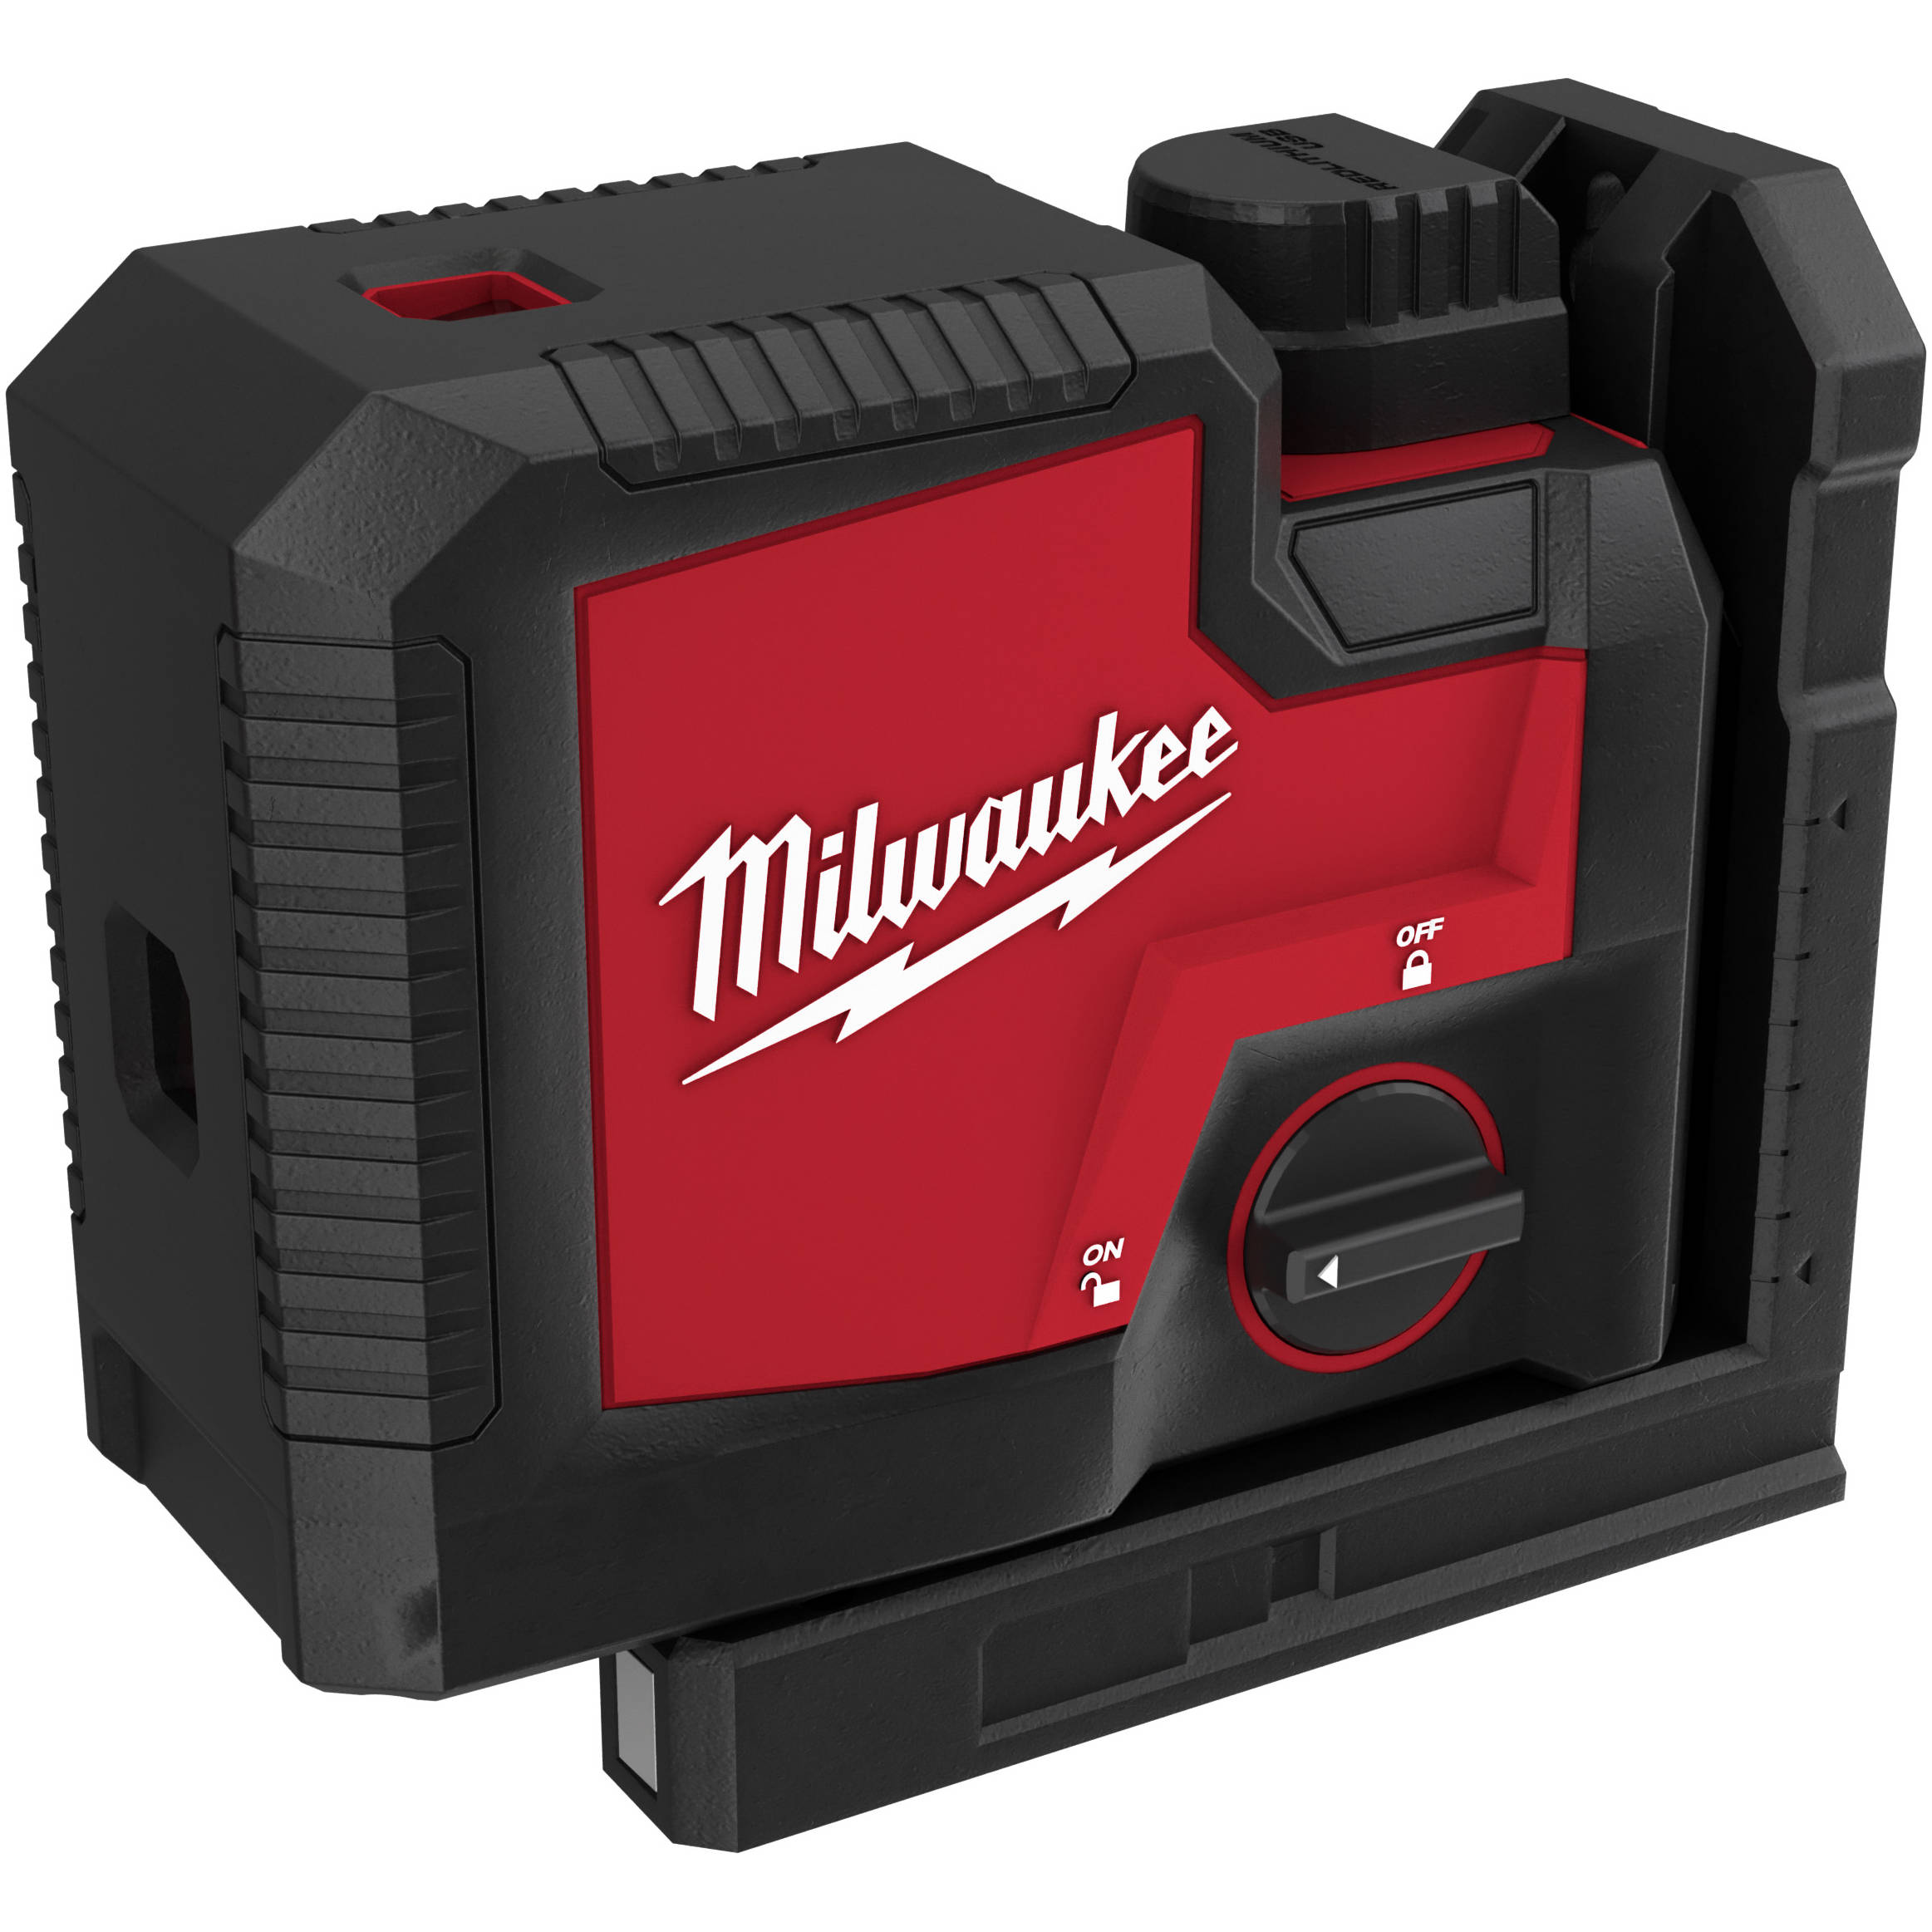 3510-21 Milwaukee USB Rechargeable Green 3-Point Laser 1